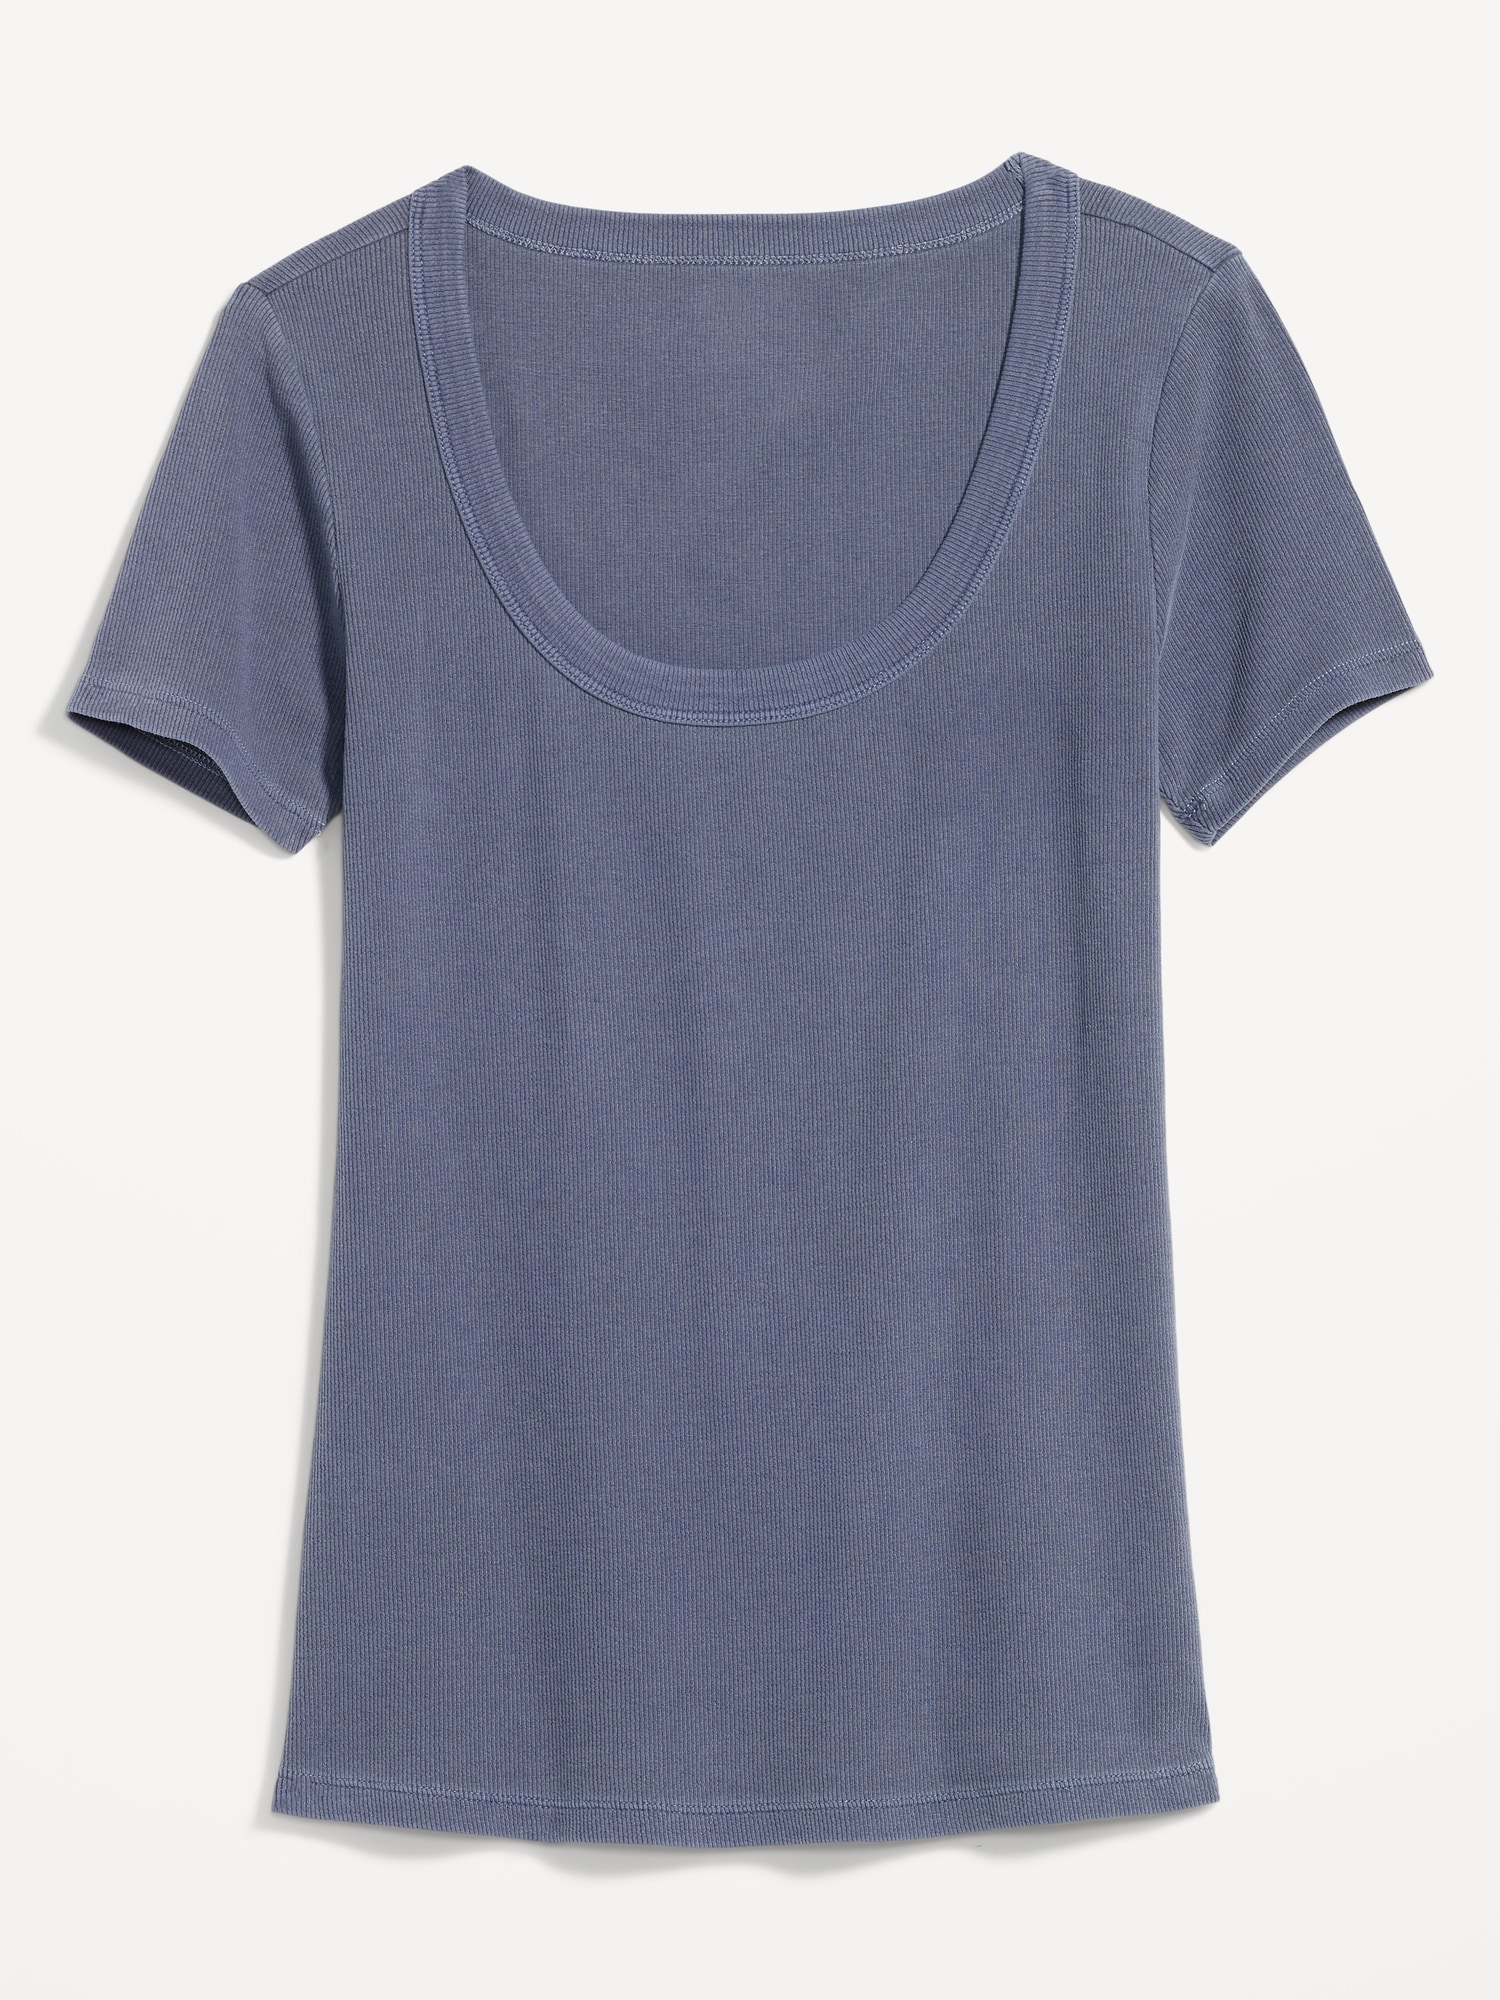 Under Armour Shirt Women Extra Small Blue Short Sleeve Fitted Scoop Neck  Stretch